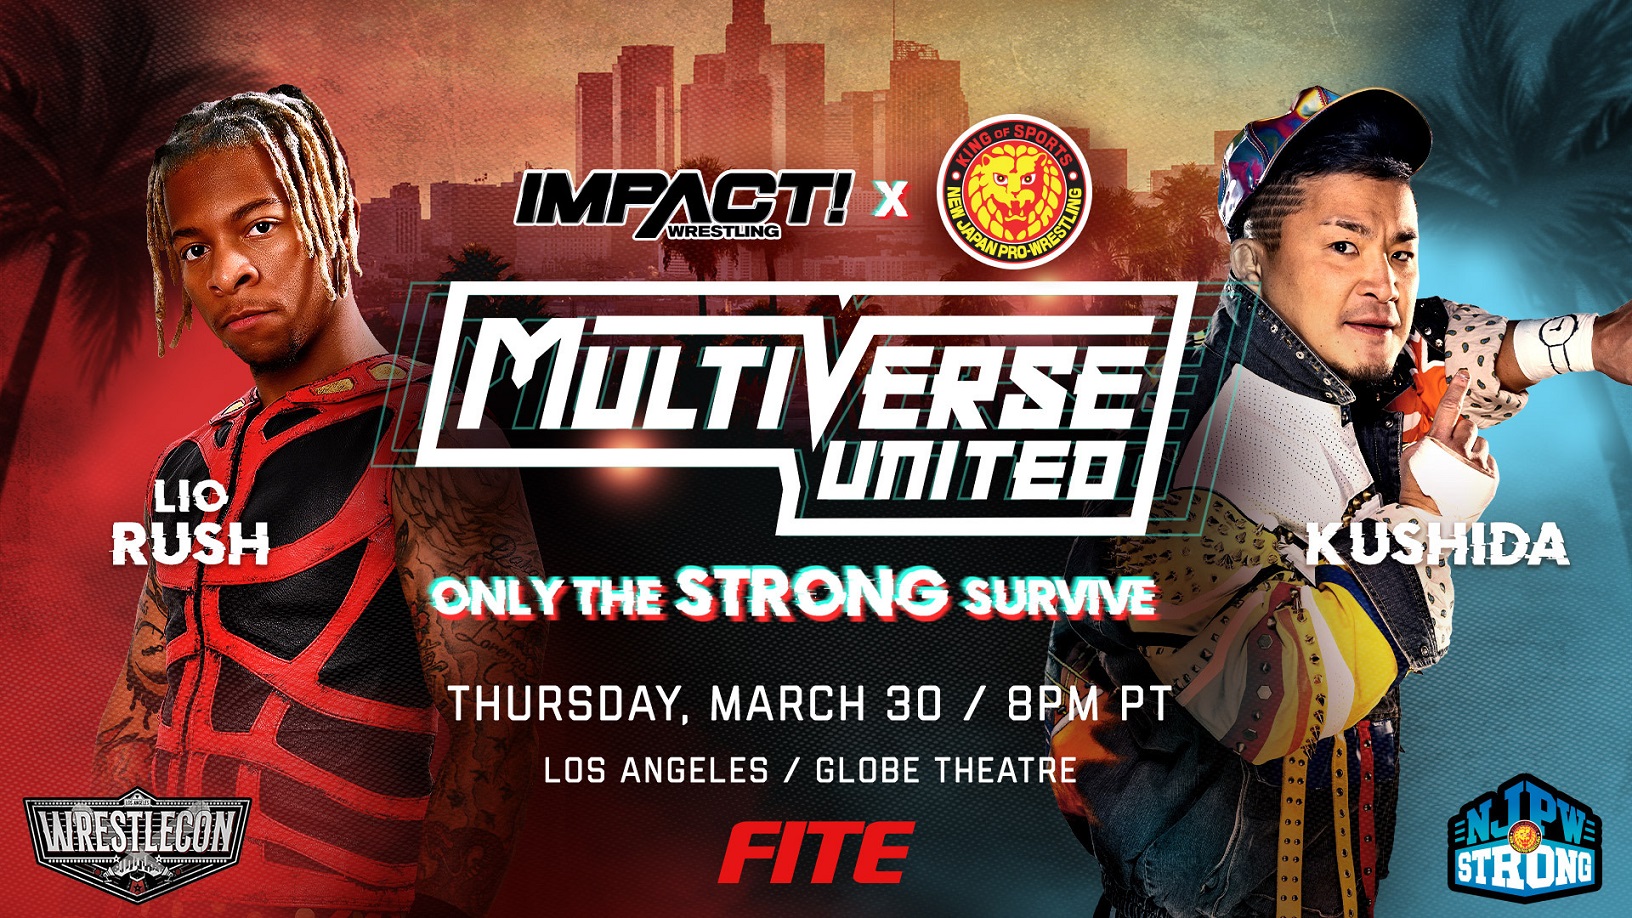 Lio Rush Steps Up to KUSHIDA This Thursday at Multiverse United: Only the STRONG Survive